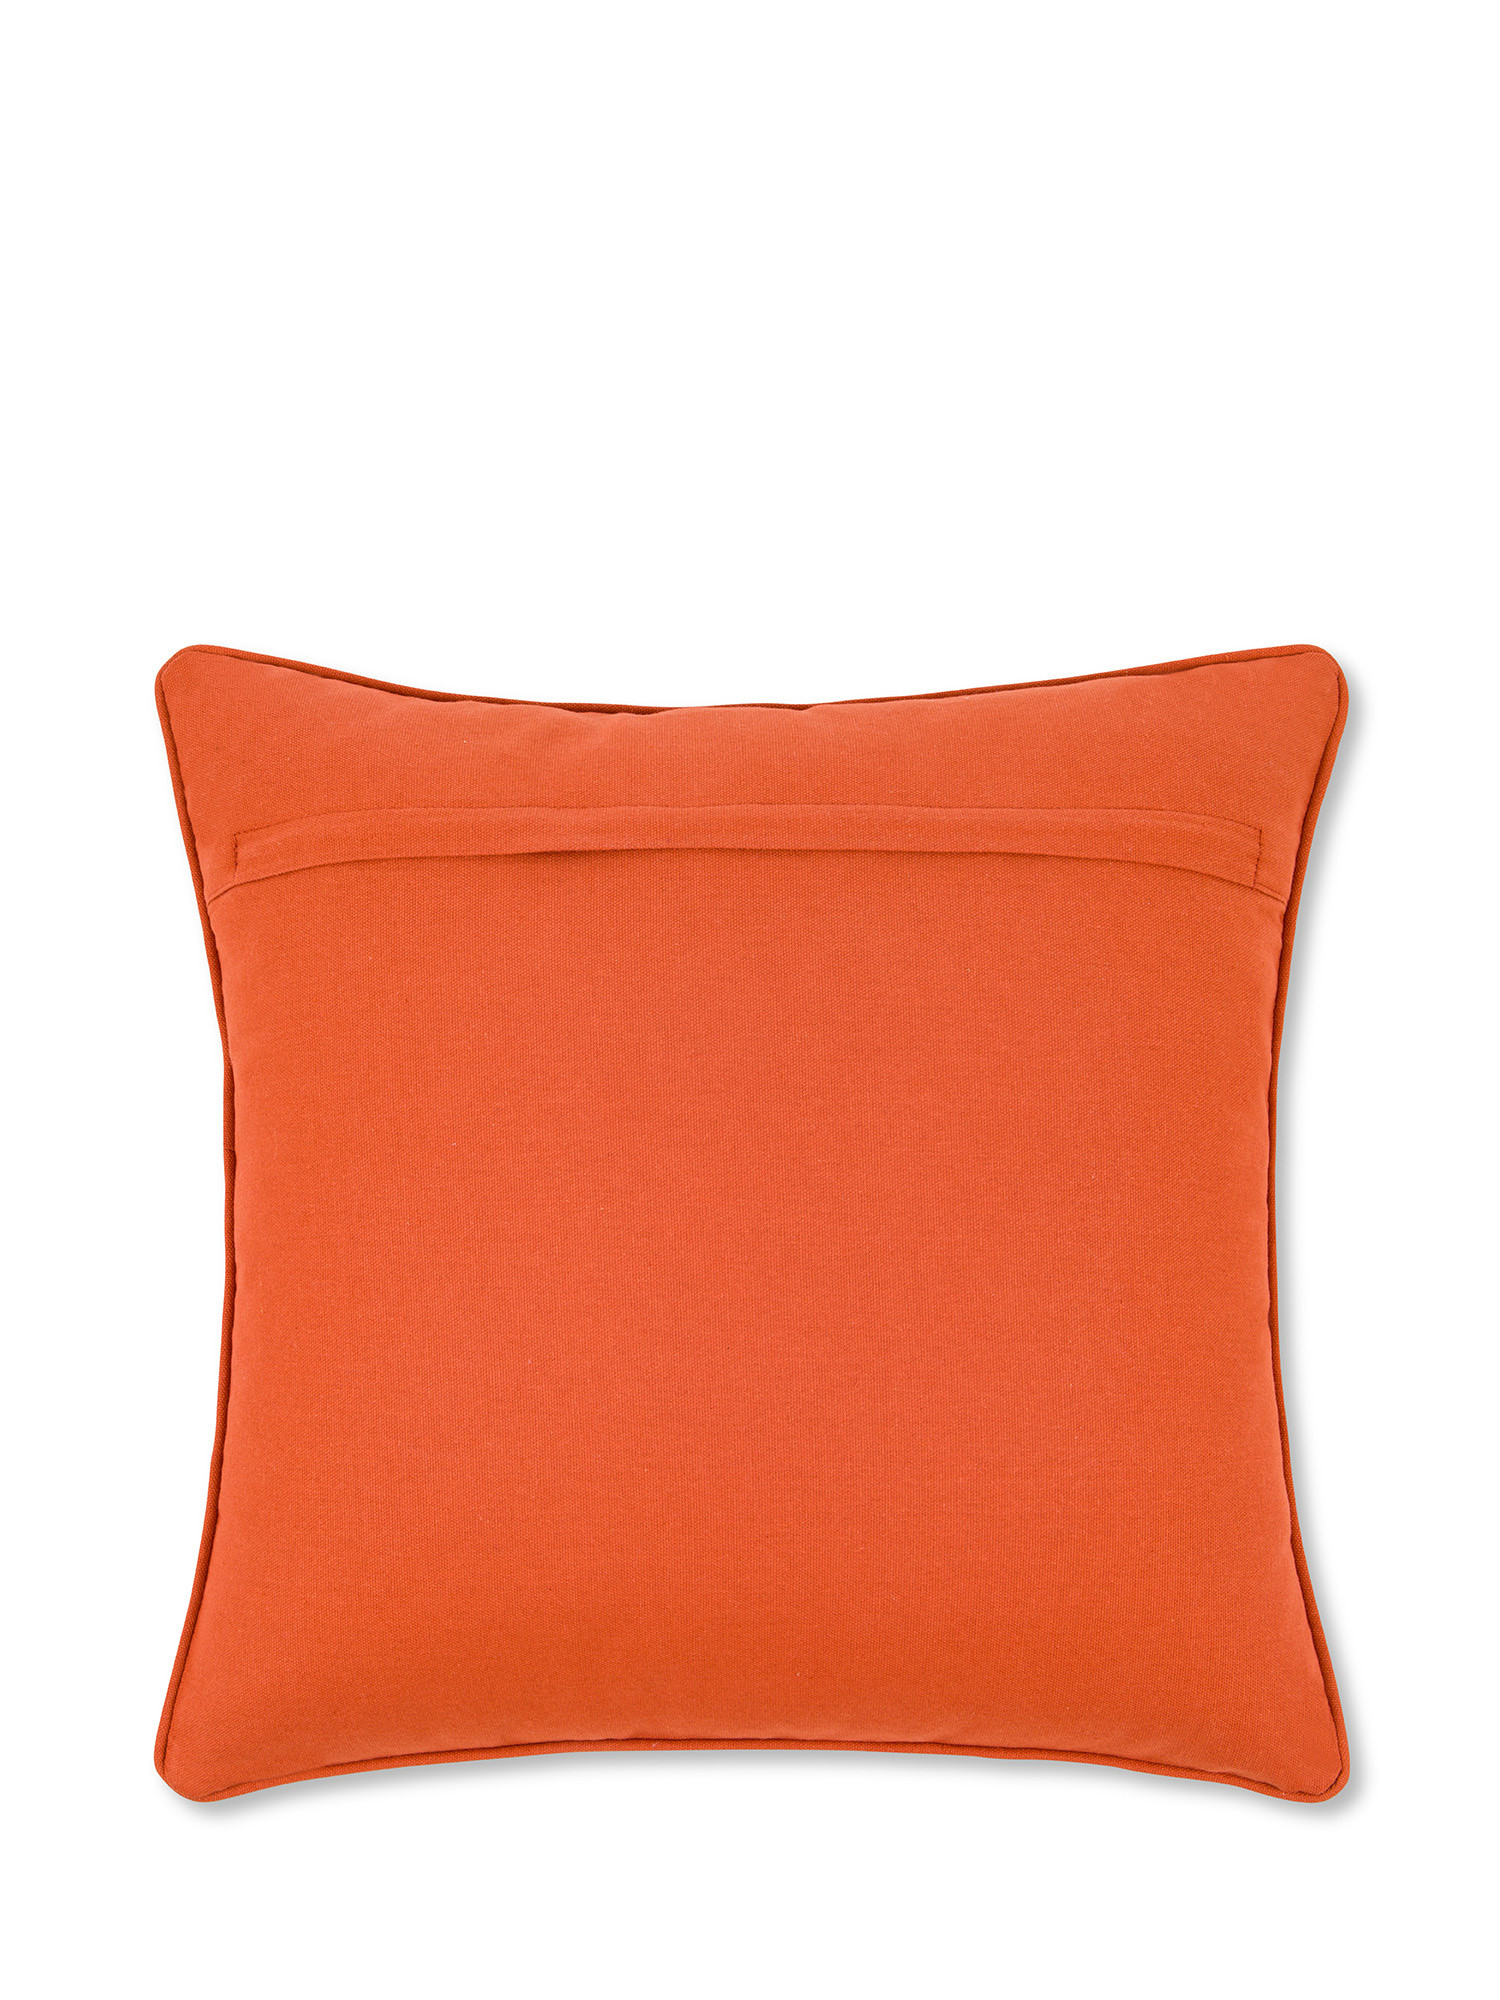 Embroidered cushion with vintage pattern 45x45cm, Orange, large image number 1